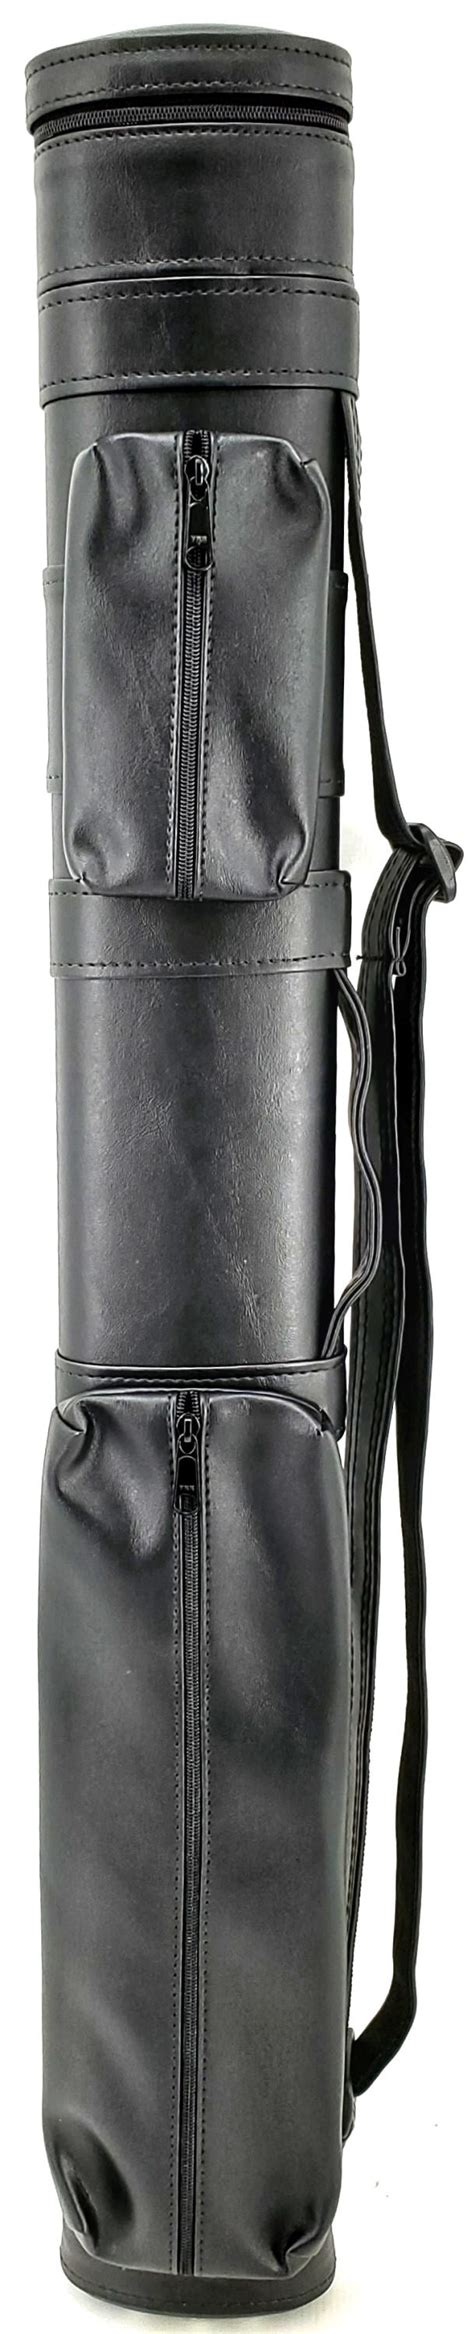 save up to 20. . Giuseppe pool cue case